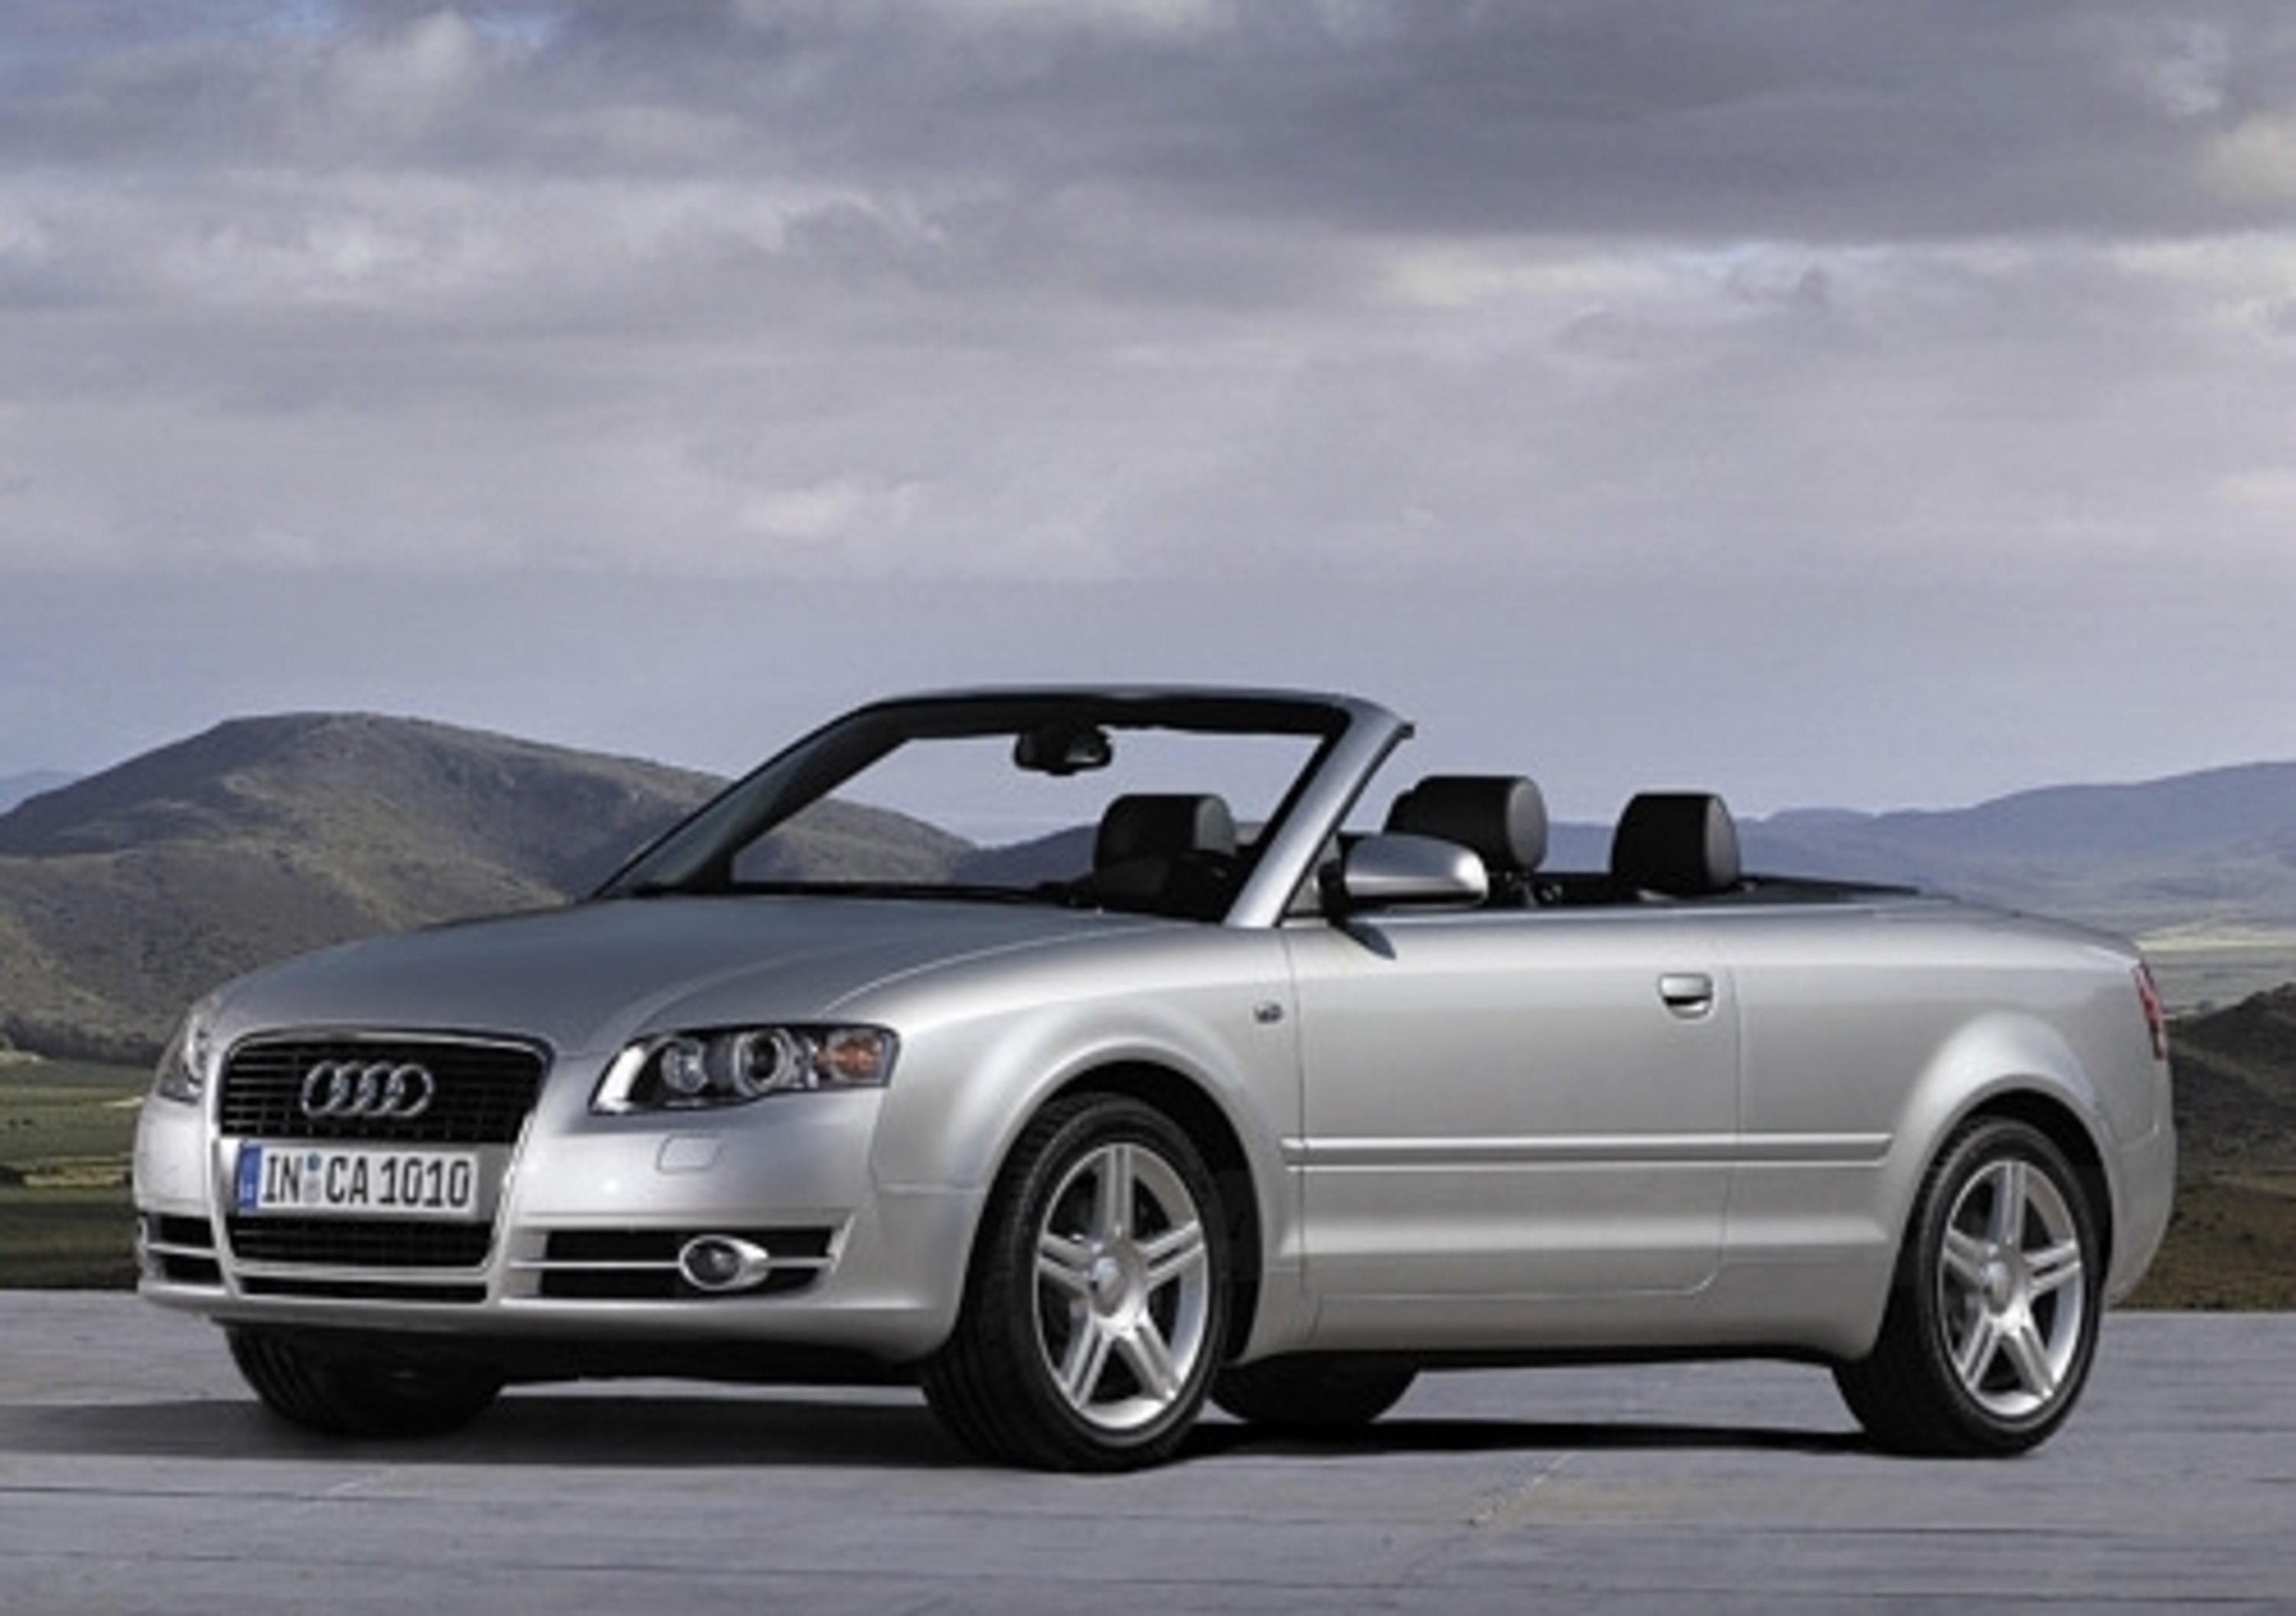 Audi A4 Cabriolet restyling